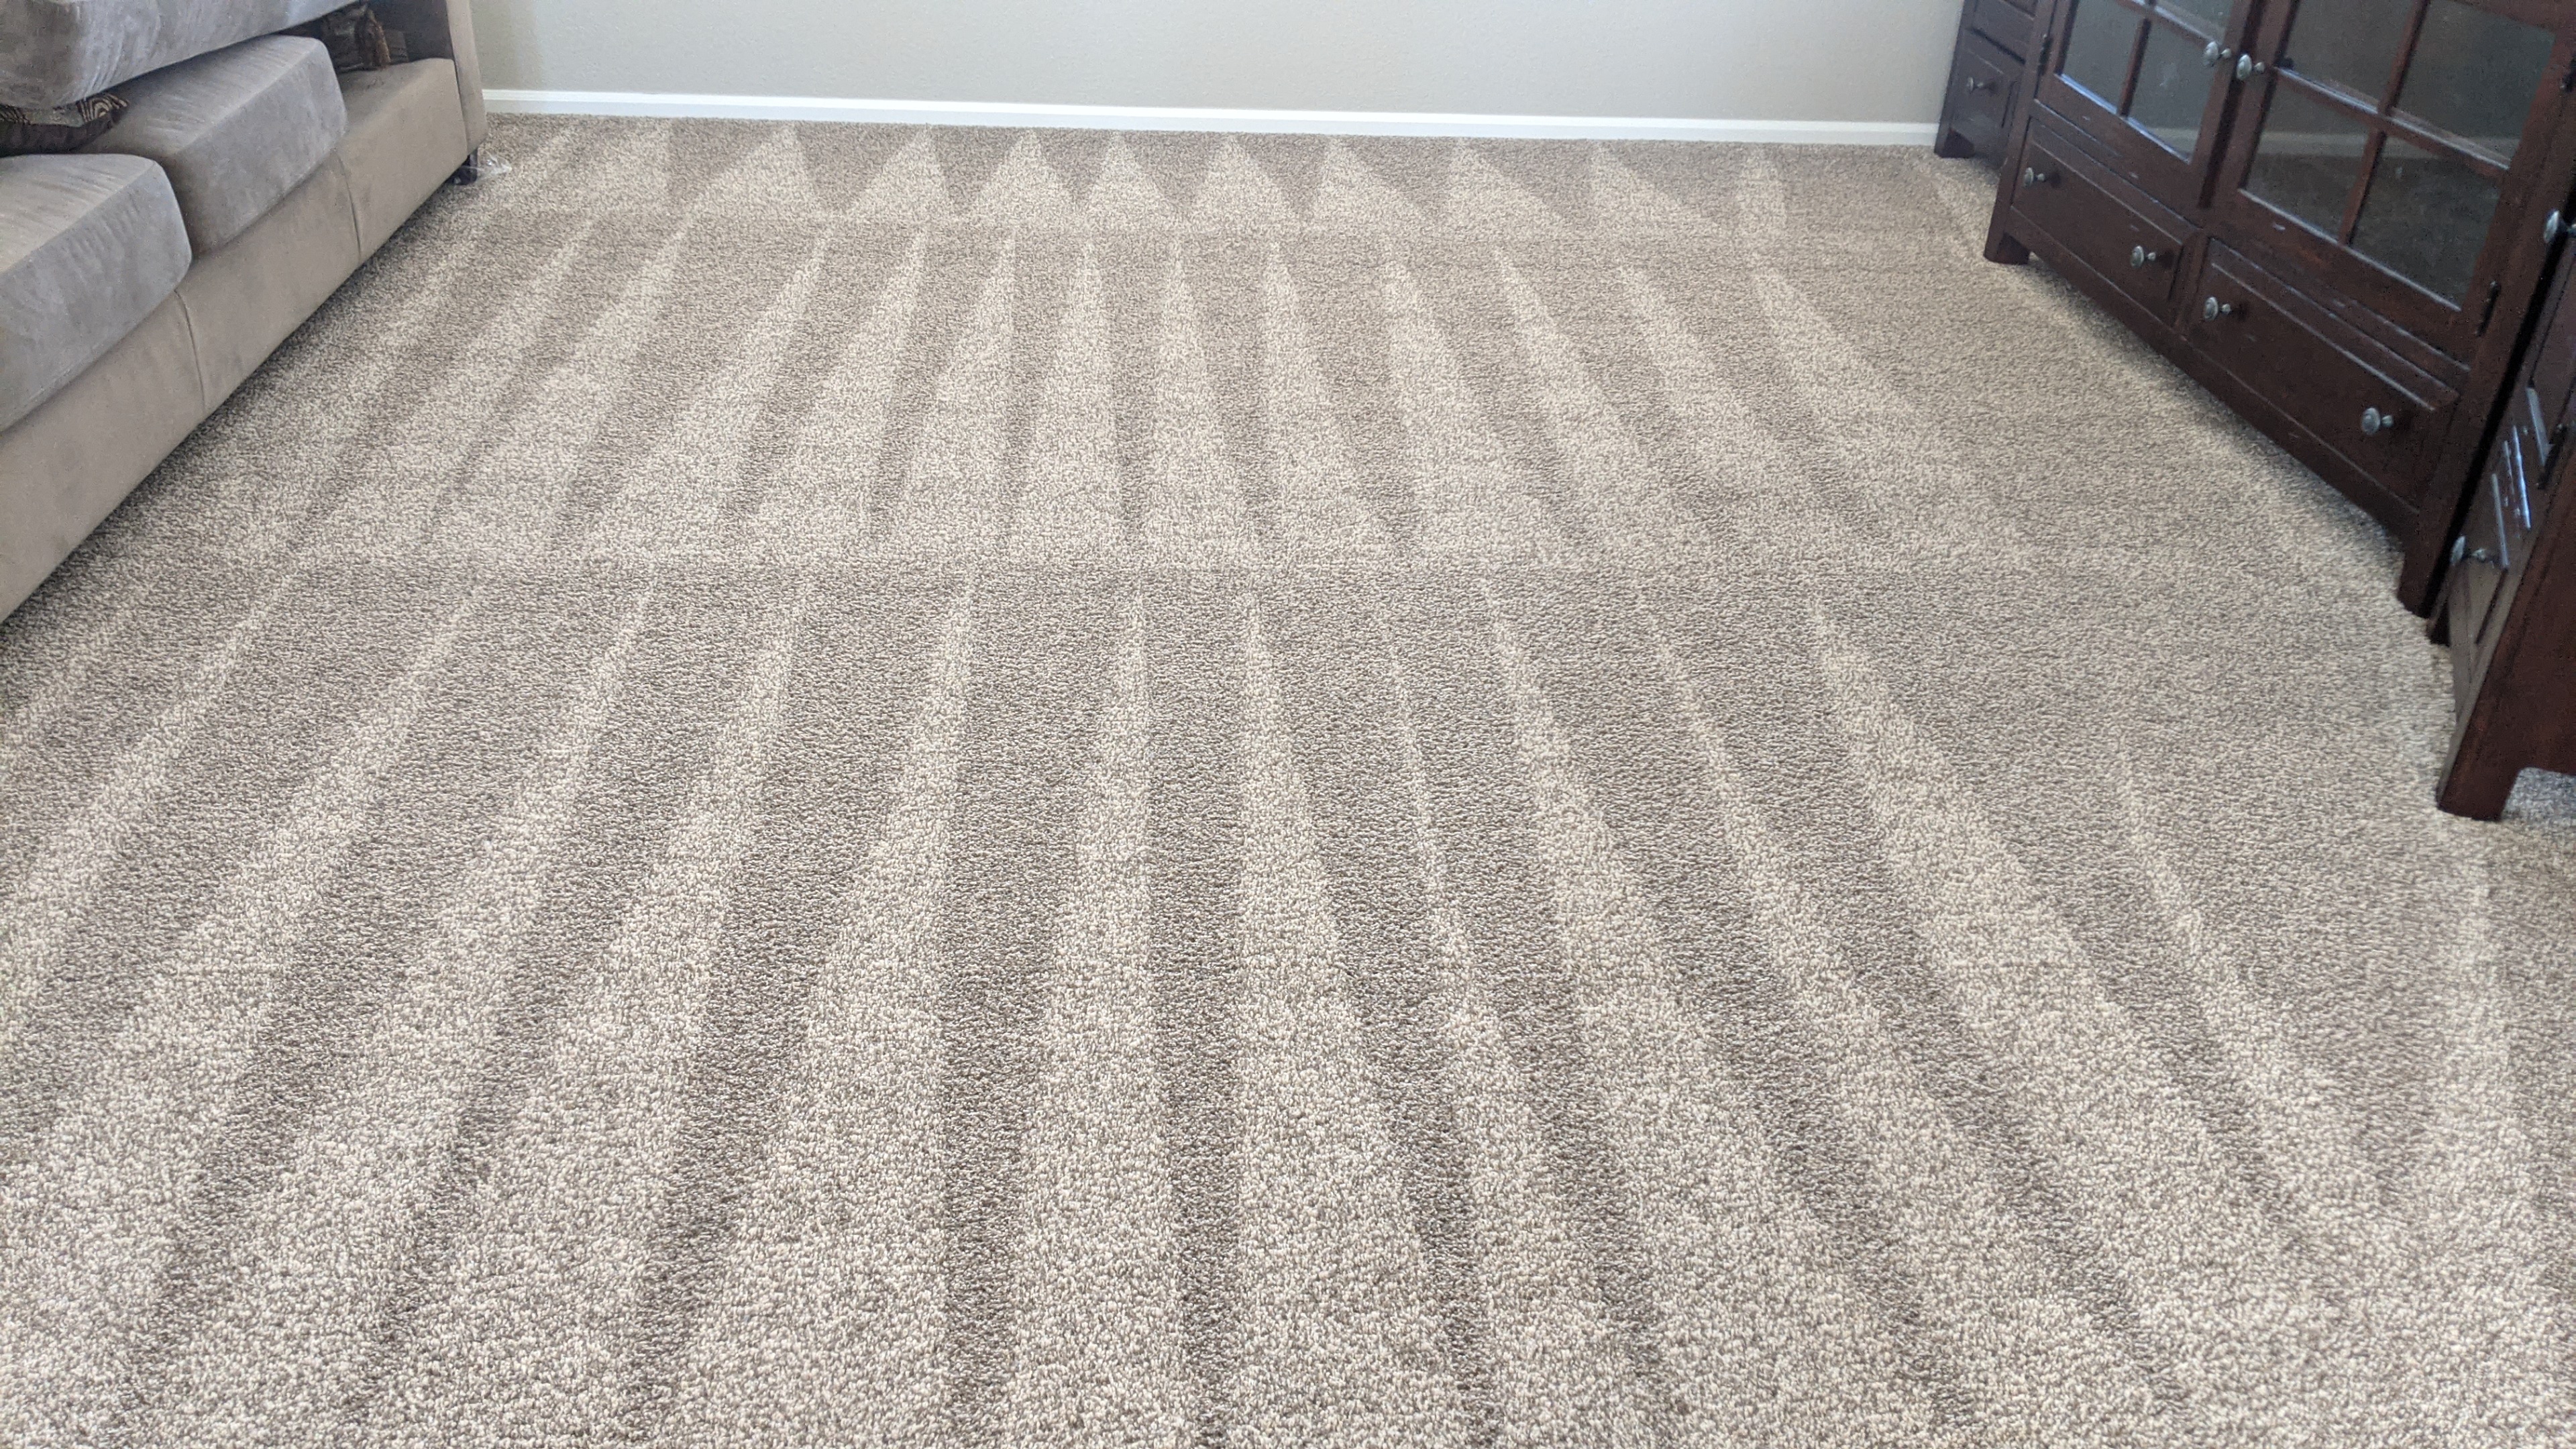 Clients actual carpet after cleaning stains